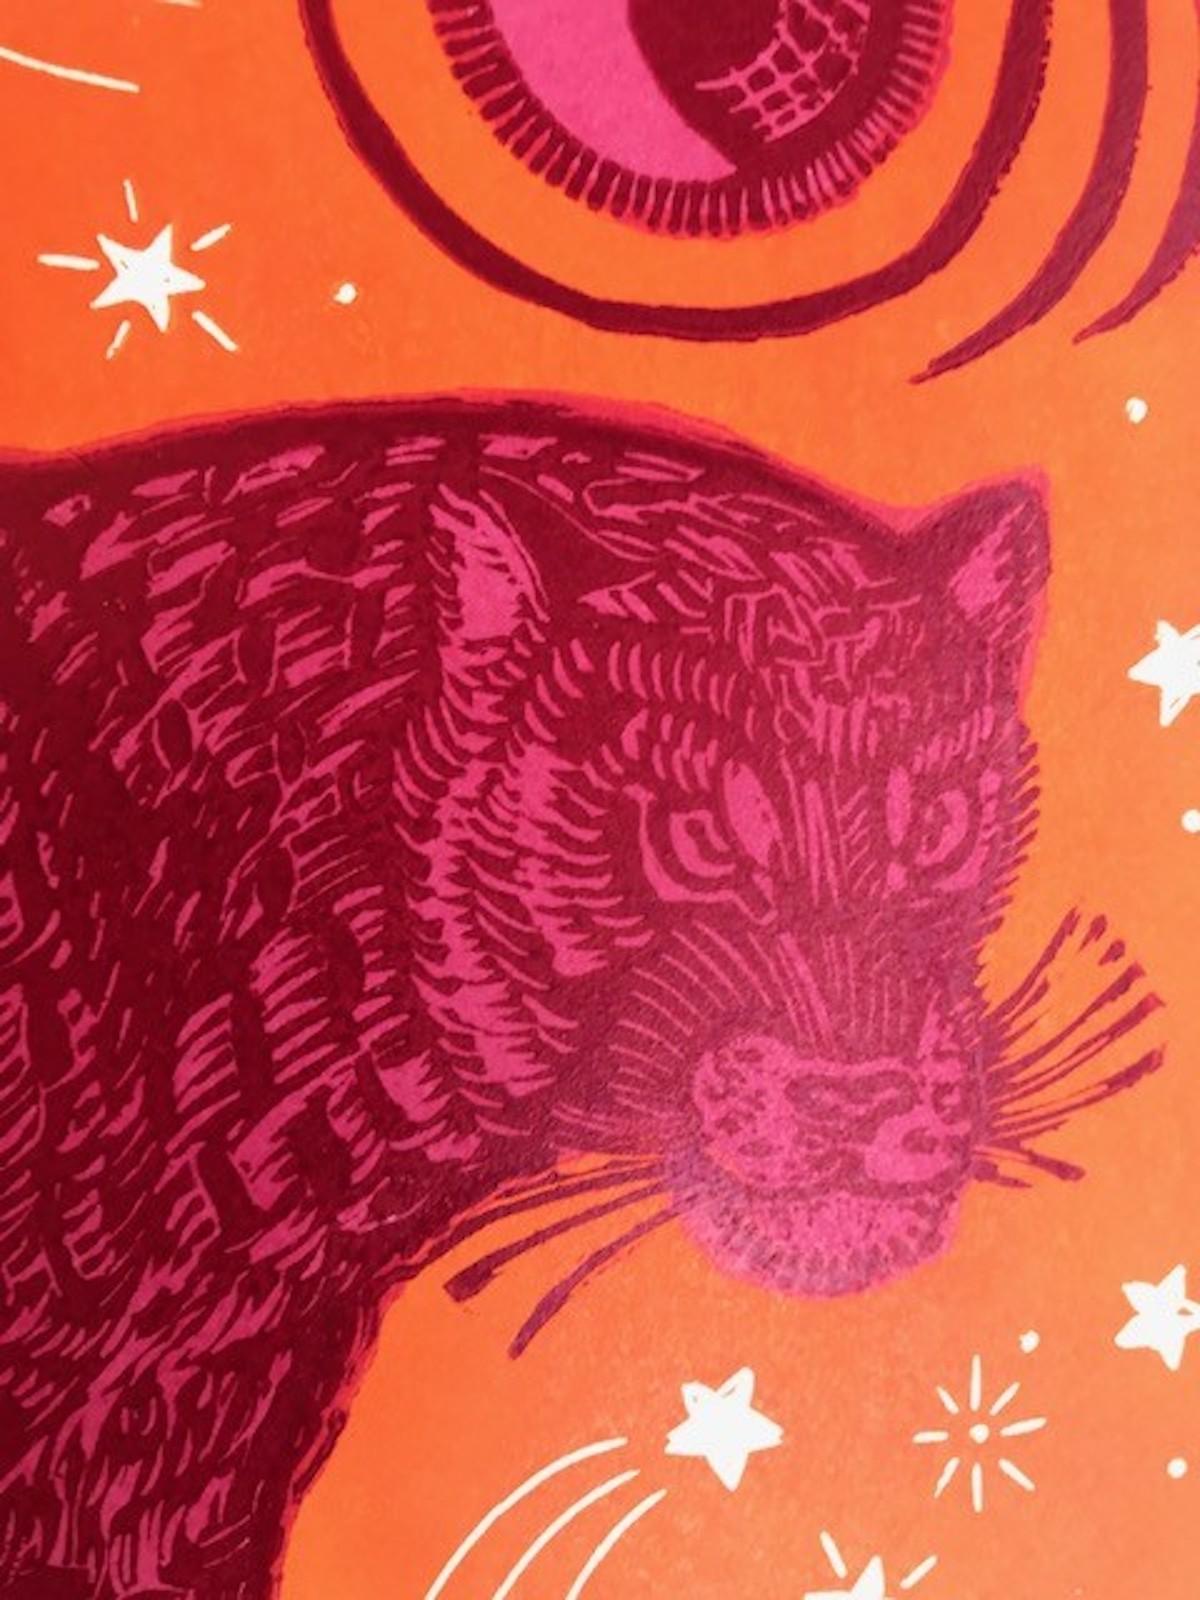 Moon Panther (pink) by Kate Willows [2021]
Please note that insitu images are purely an indication of how a piece may look

This print shows a moonlit panther, inspired by a woodcut by the 18th century English artist Thomas Bewick. Once I have